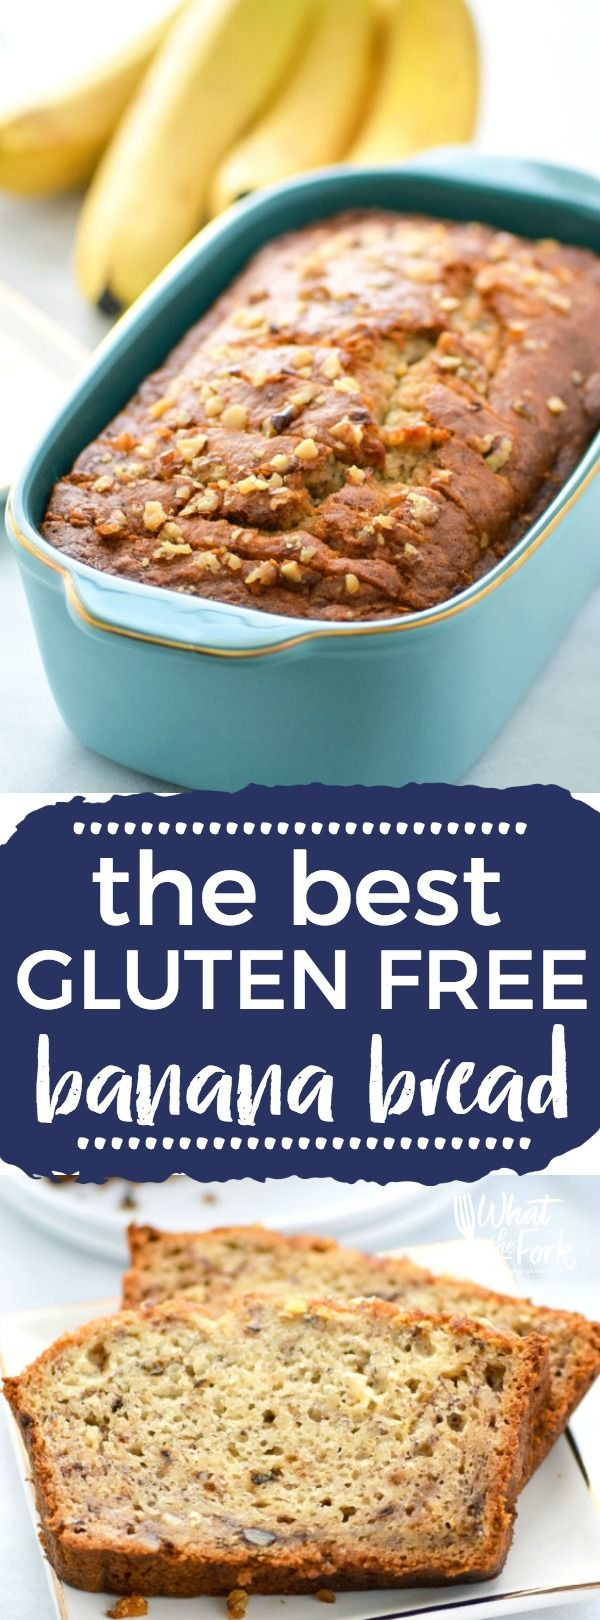 Easy Dairy Free Recipes
 1000 ideas about Gluten Free Foods on Pinterest